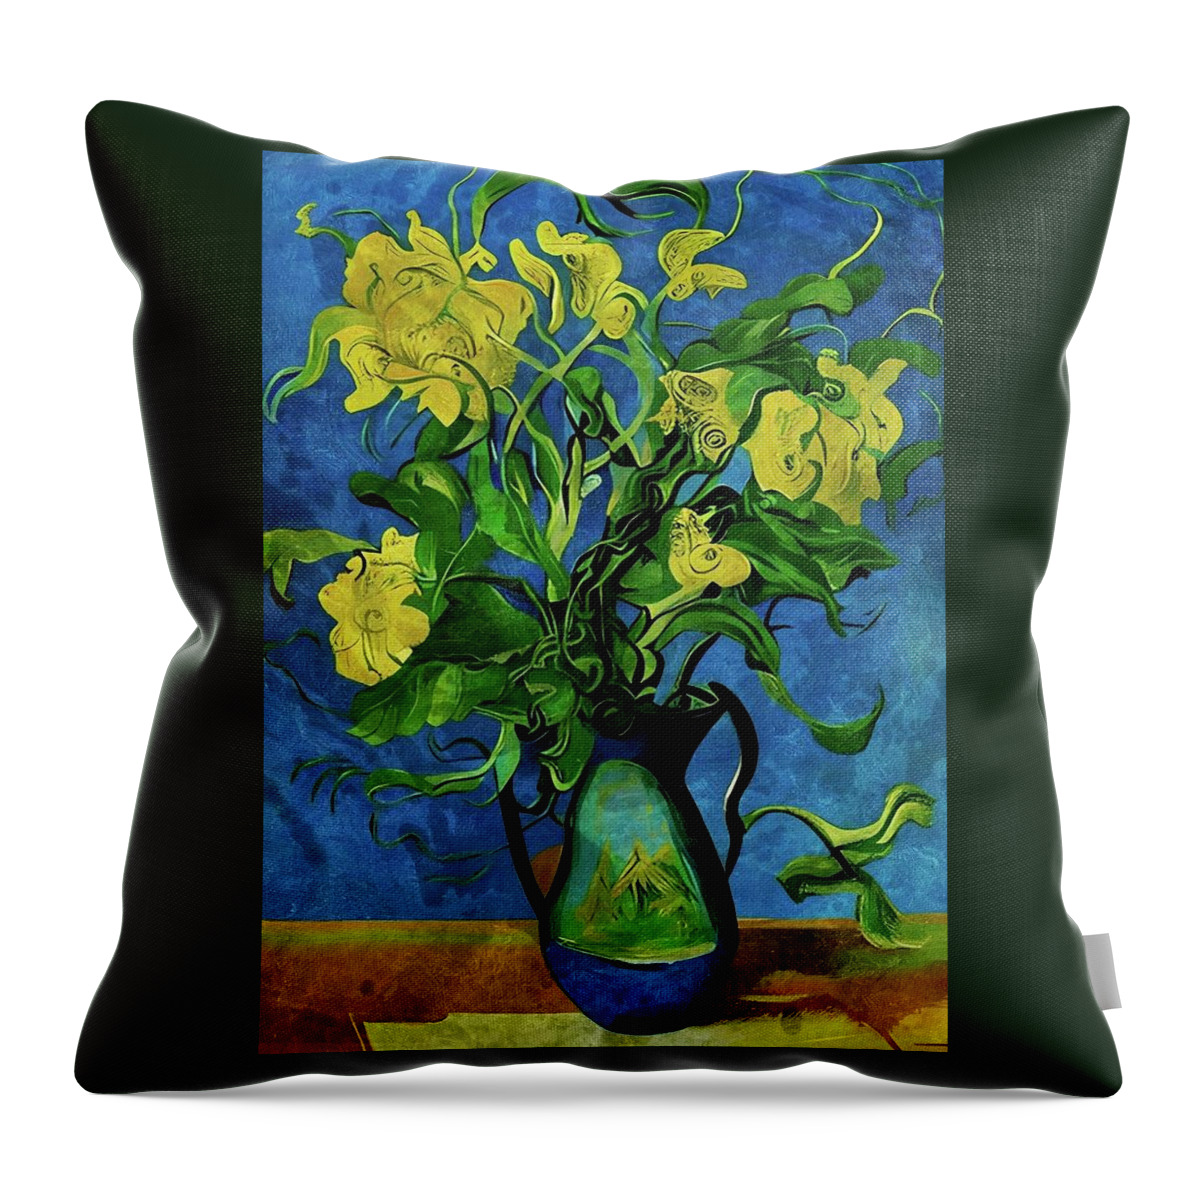 Flowers Throw Pillow featuring the digital art Flowing Flowers by Ally White